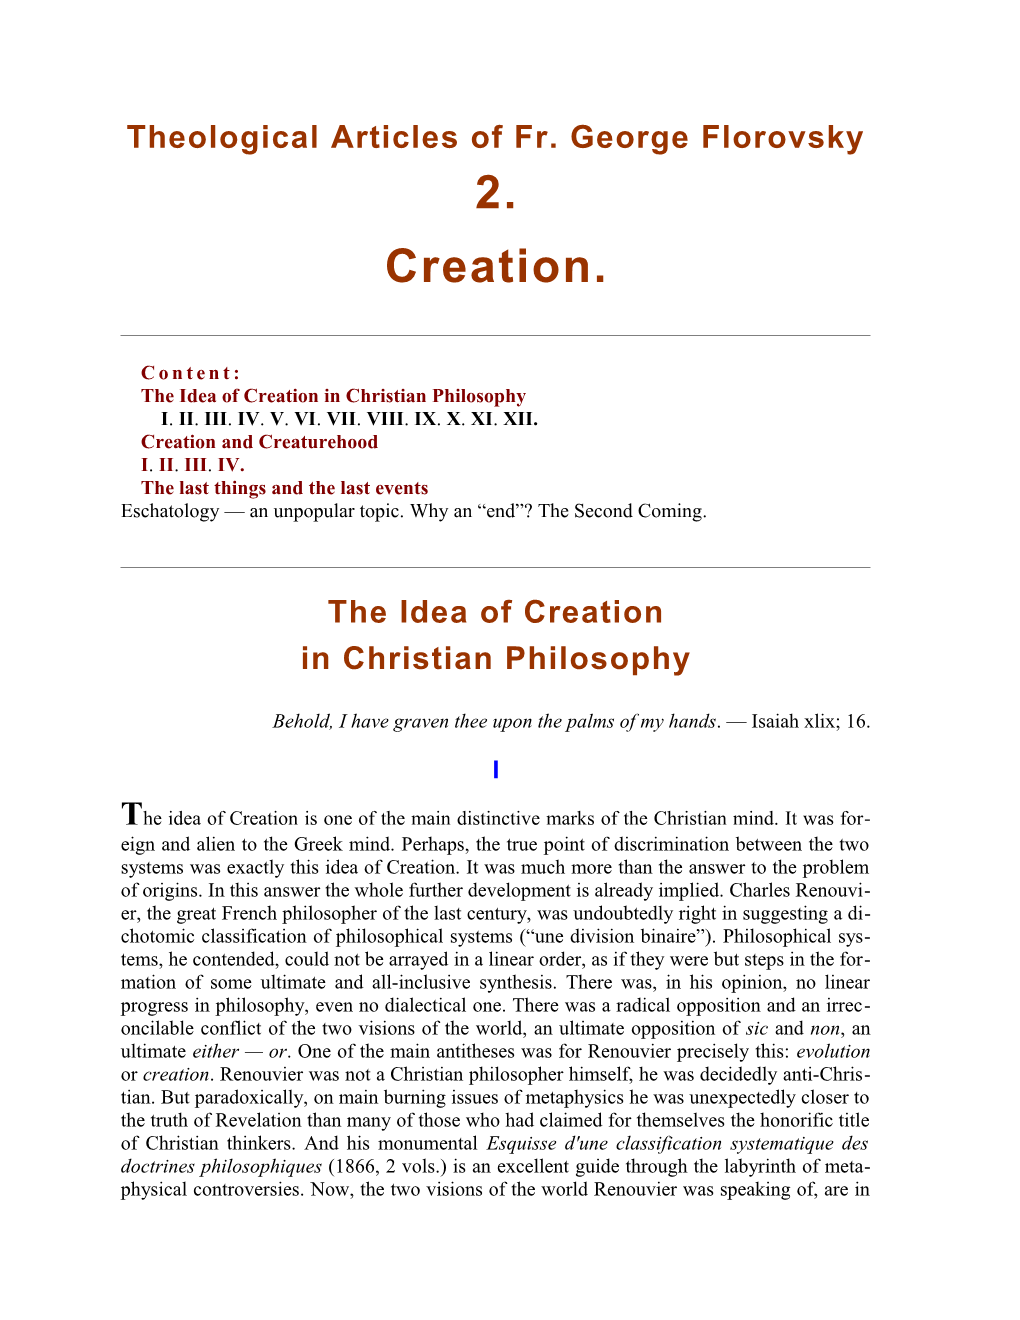 The Idea of Creation in Christian Philosophy